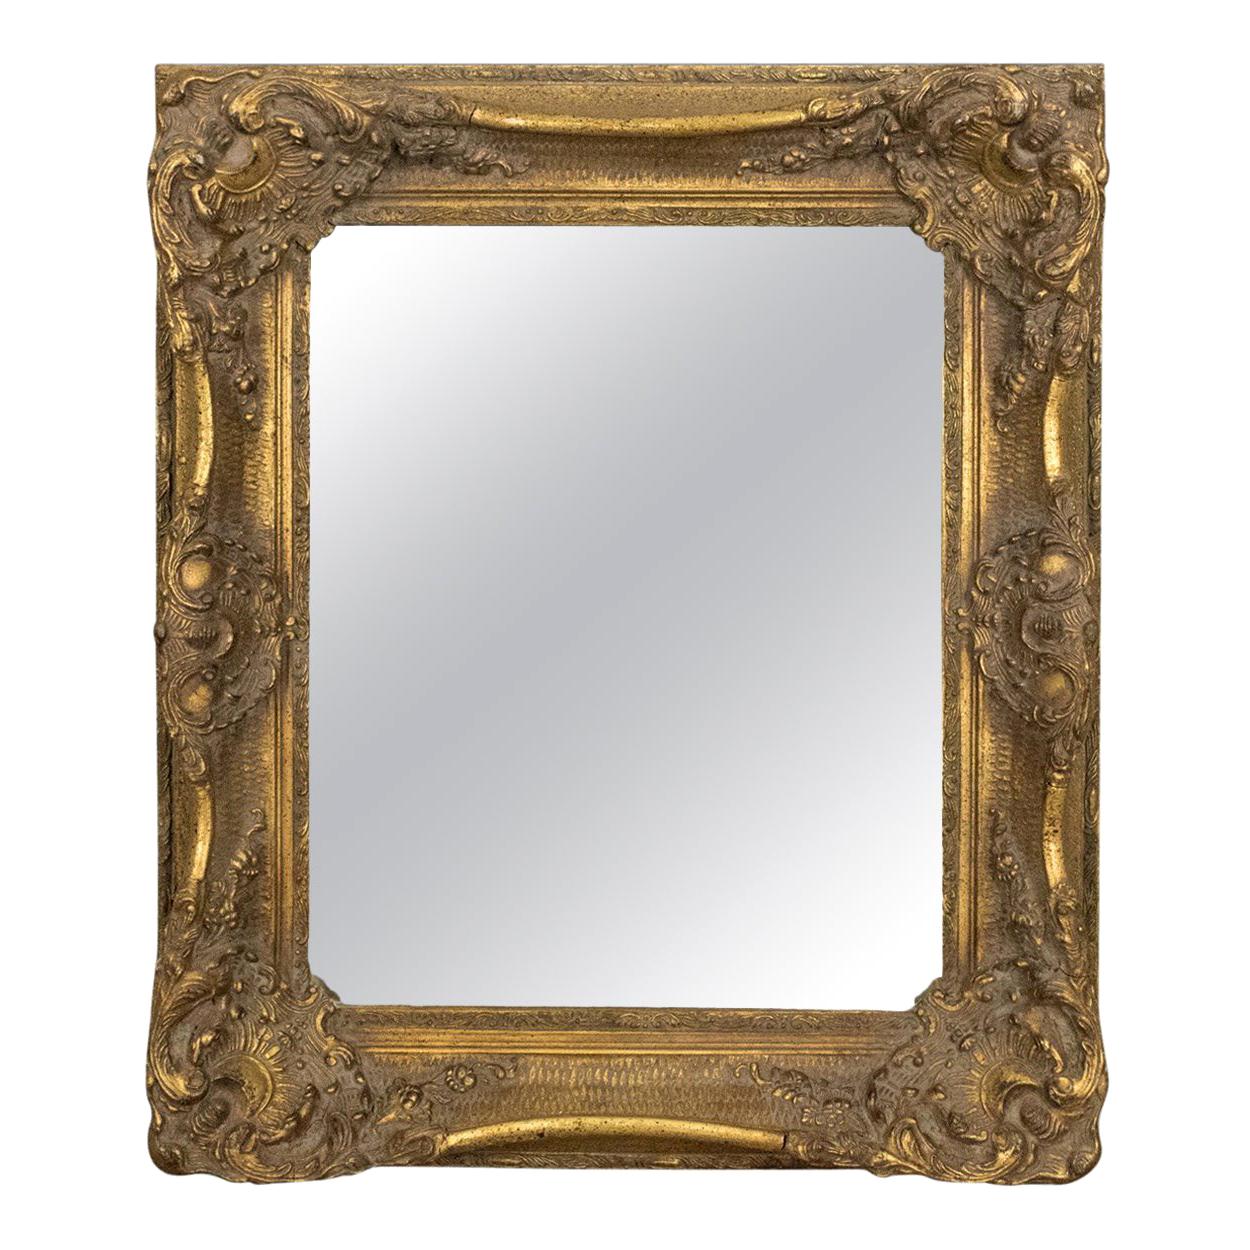 Wall Mirror in Victorian Classical Revival Taste, Giltwood, Late 20th Century